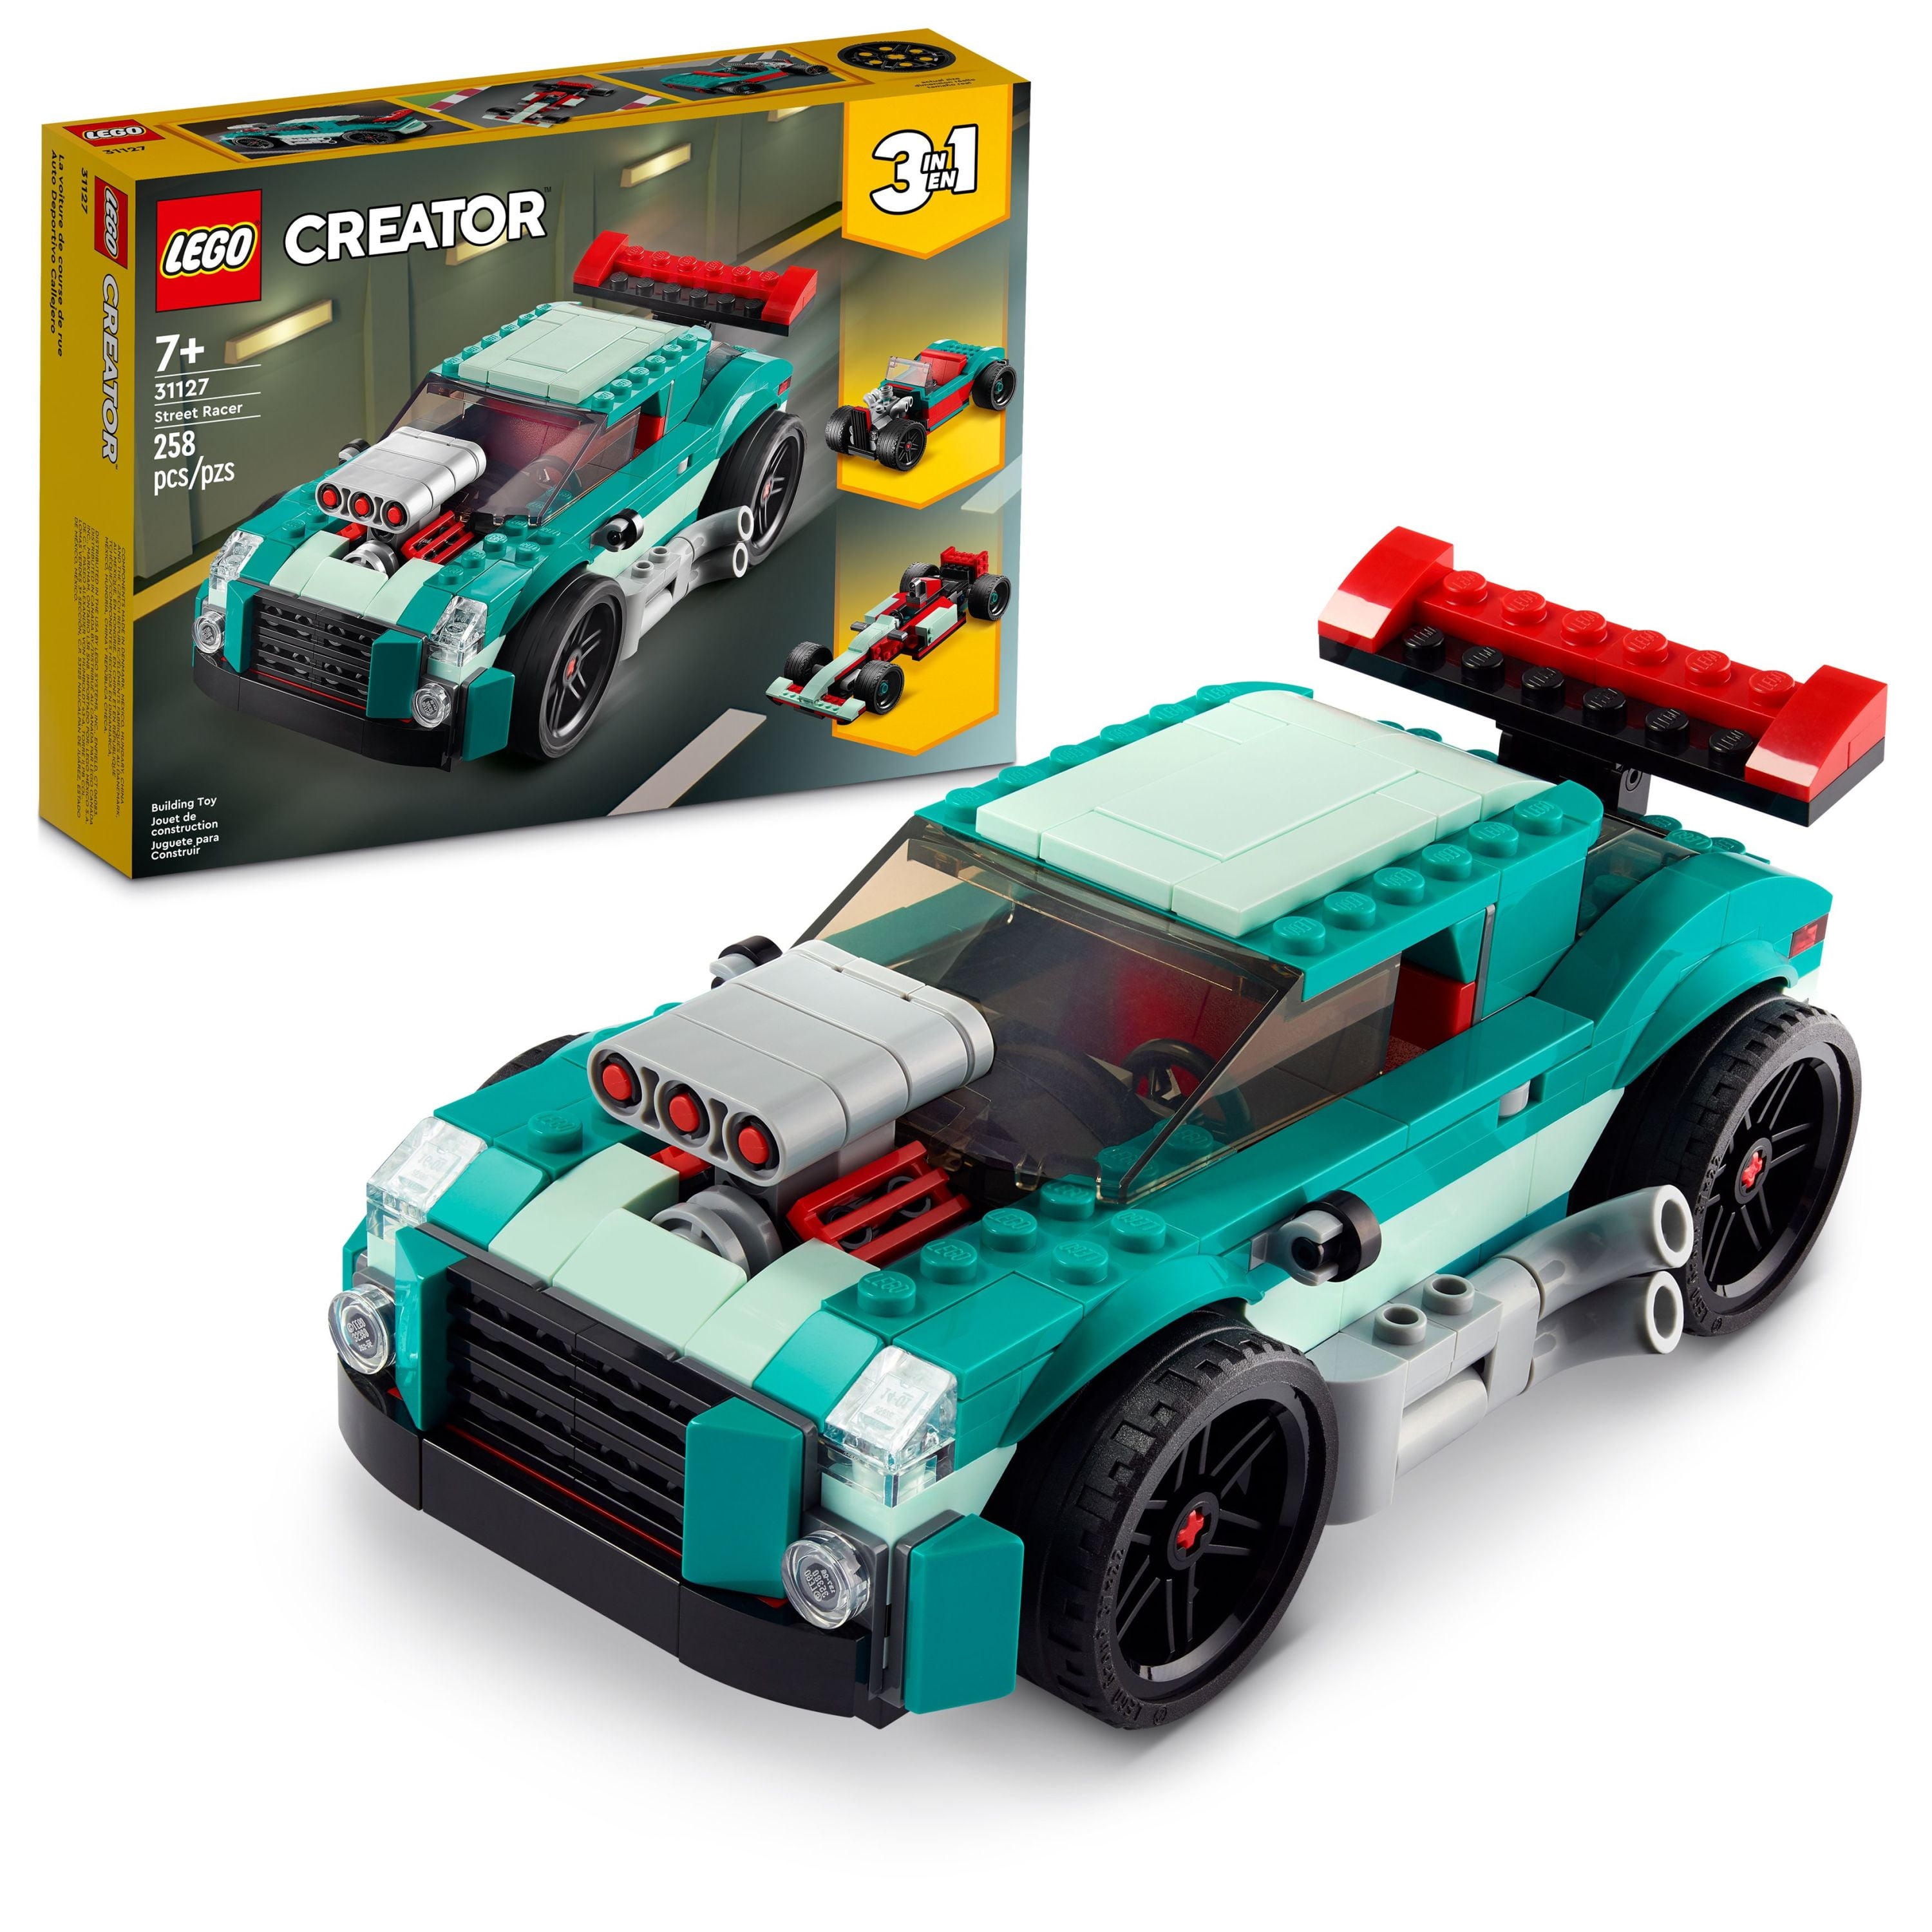 LEGO Creator 3in1 Street Racer Muscle to Hot Rod to Race Car Toys 31127, Model Vehicle Building Bricks Set, Gifts for 7 Plus Year Old Boys & Girls